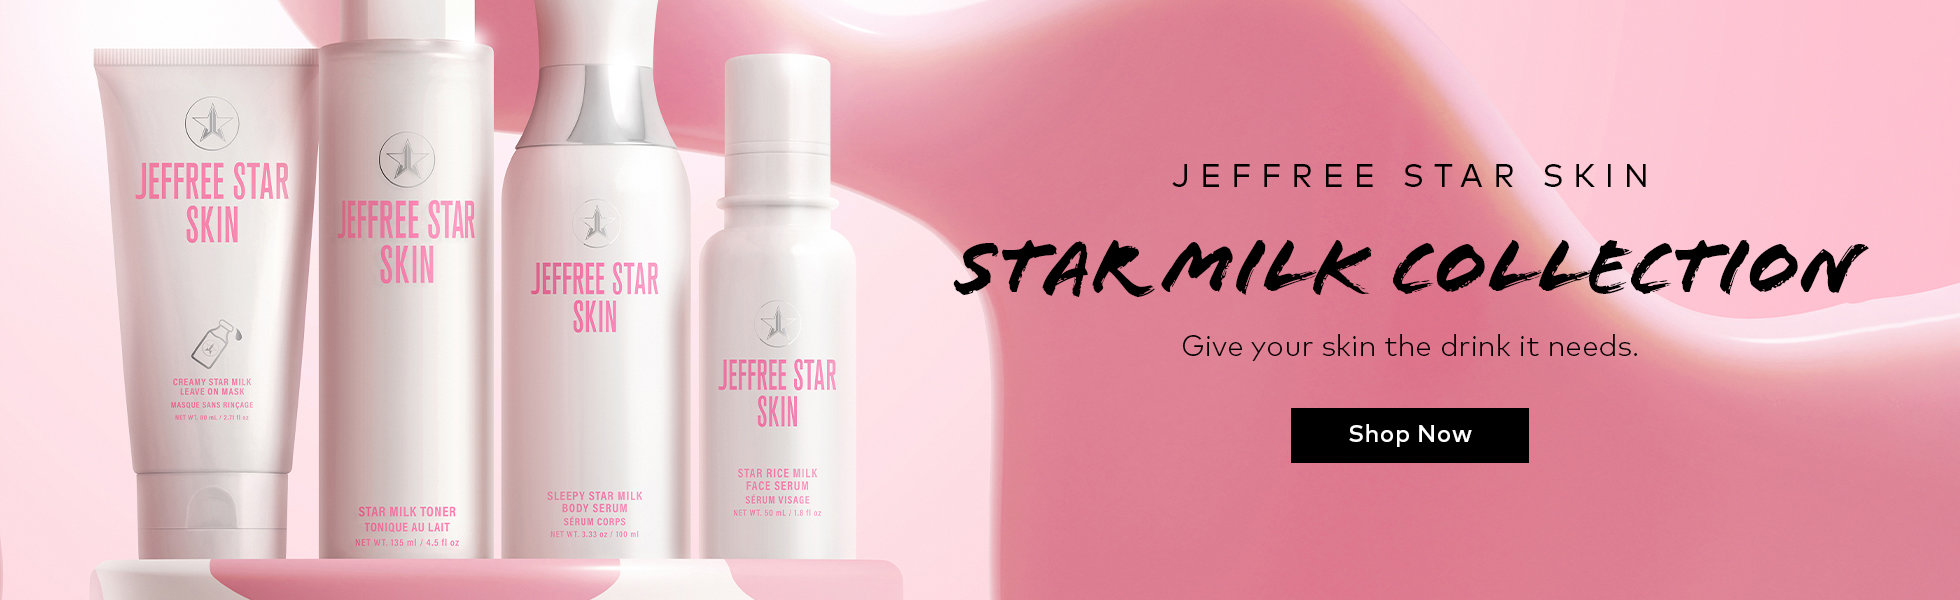 Shop the new Jeffree Star Skin Star Milk Collection now available at Beautylish.com